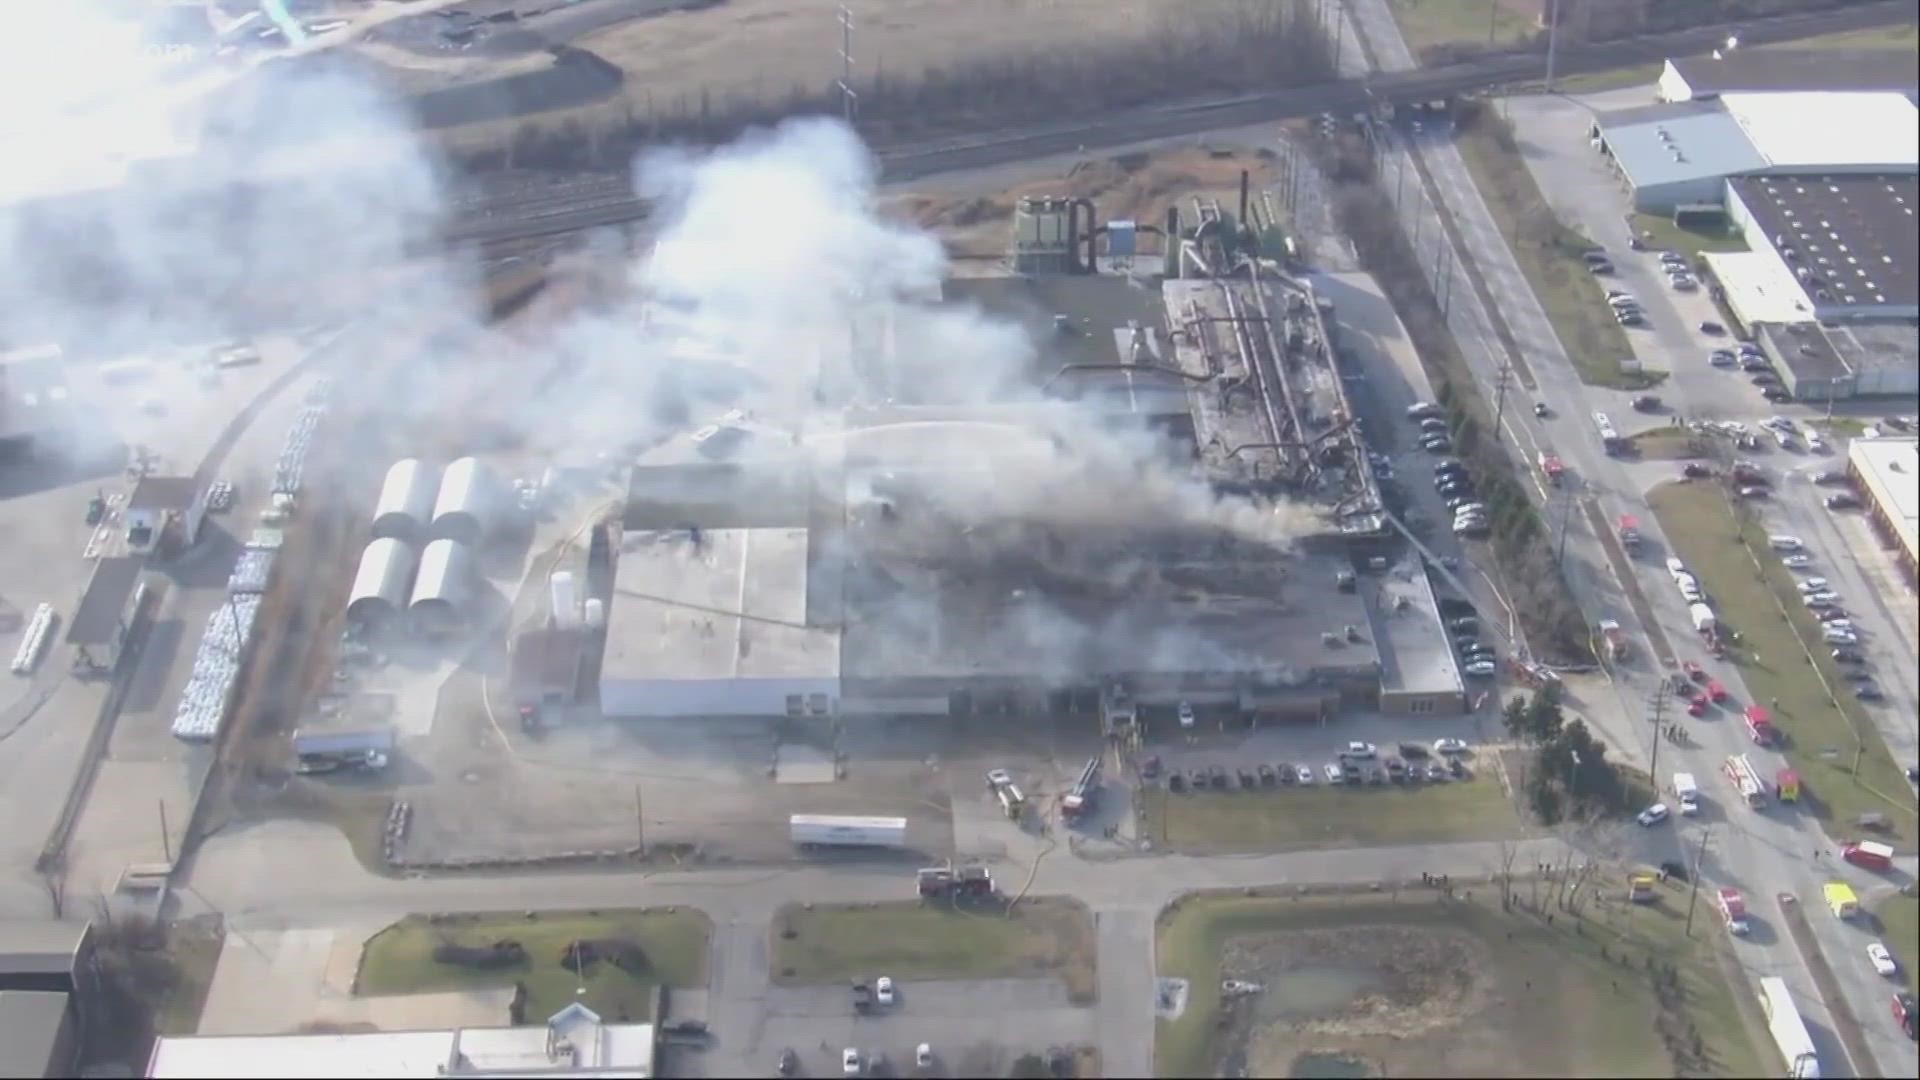 A plane crashed and killed five people near the 3M Plant in Little Rock this afternoon, according to officials.